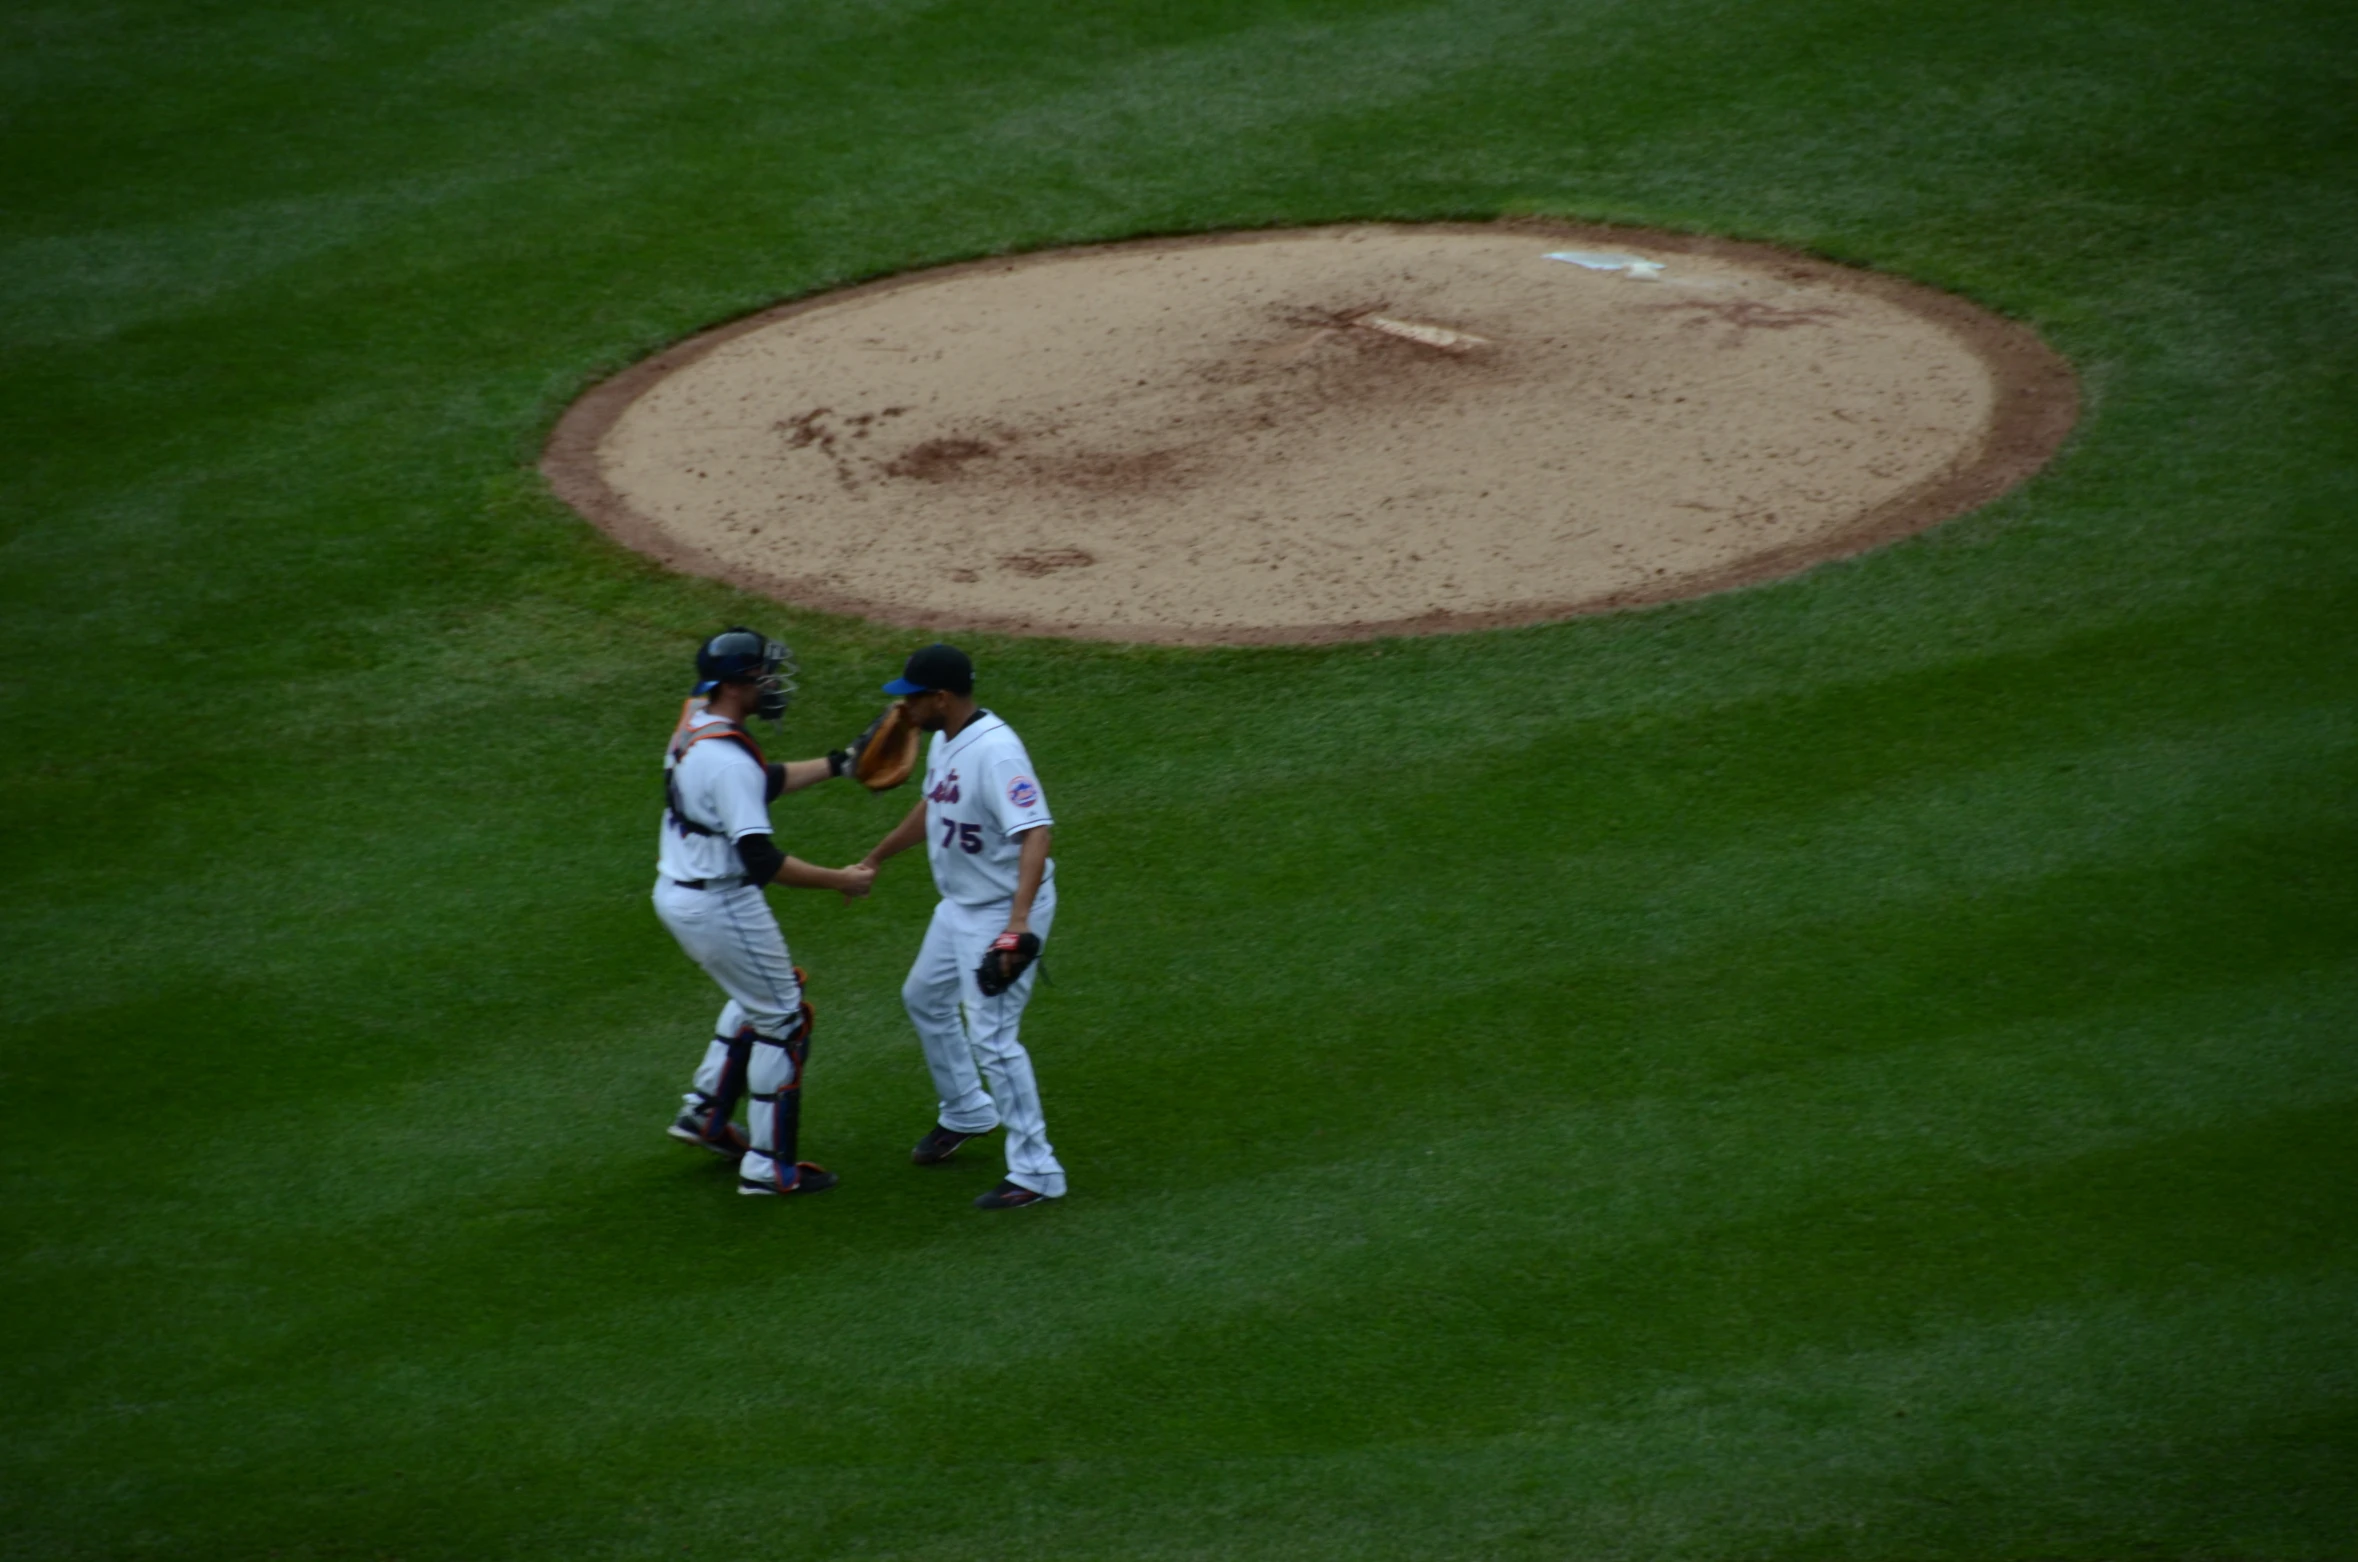 two baseball players shake hands after playing a game